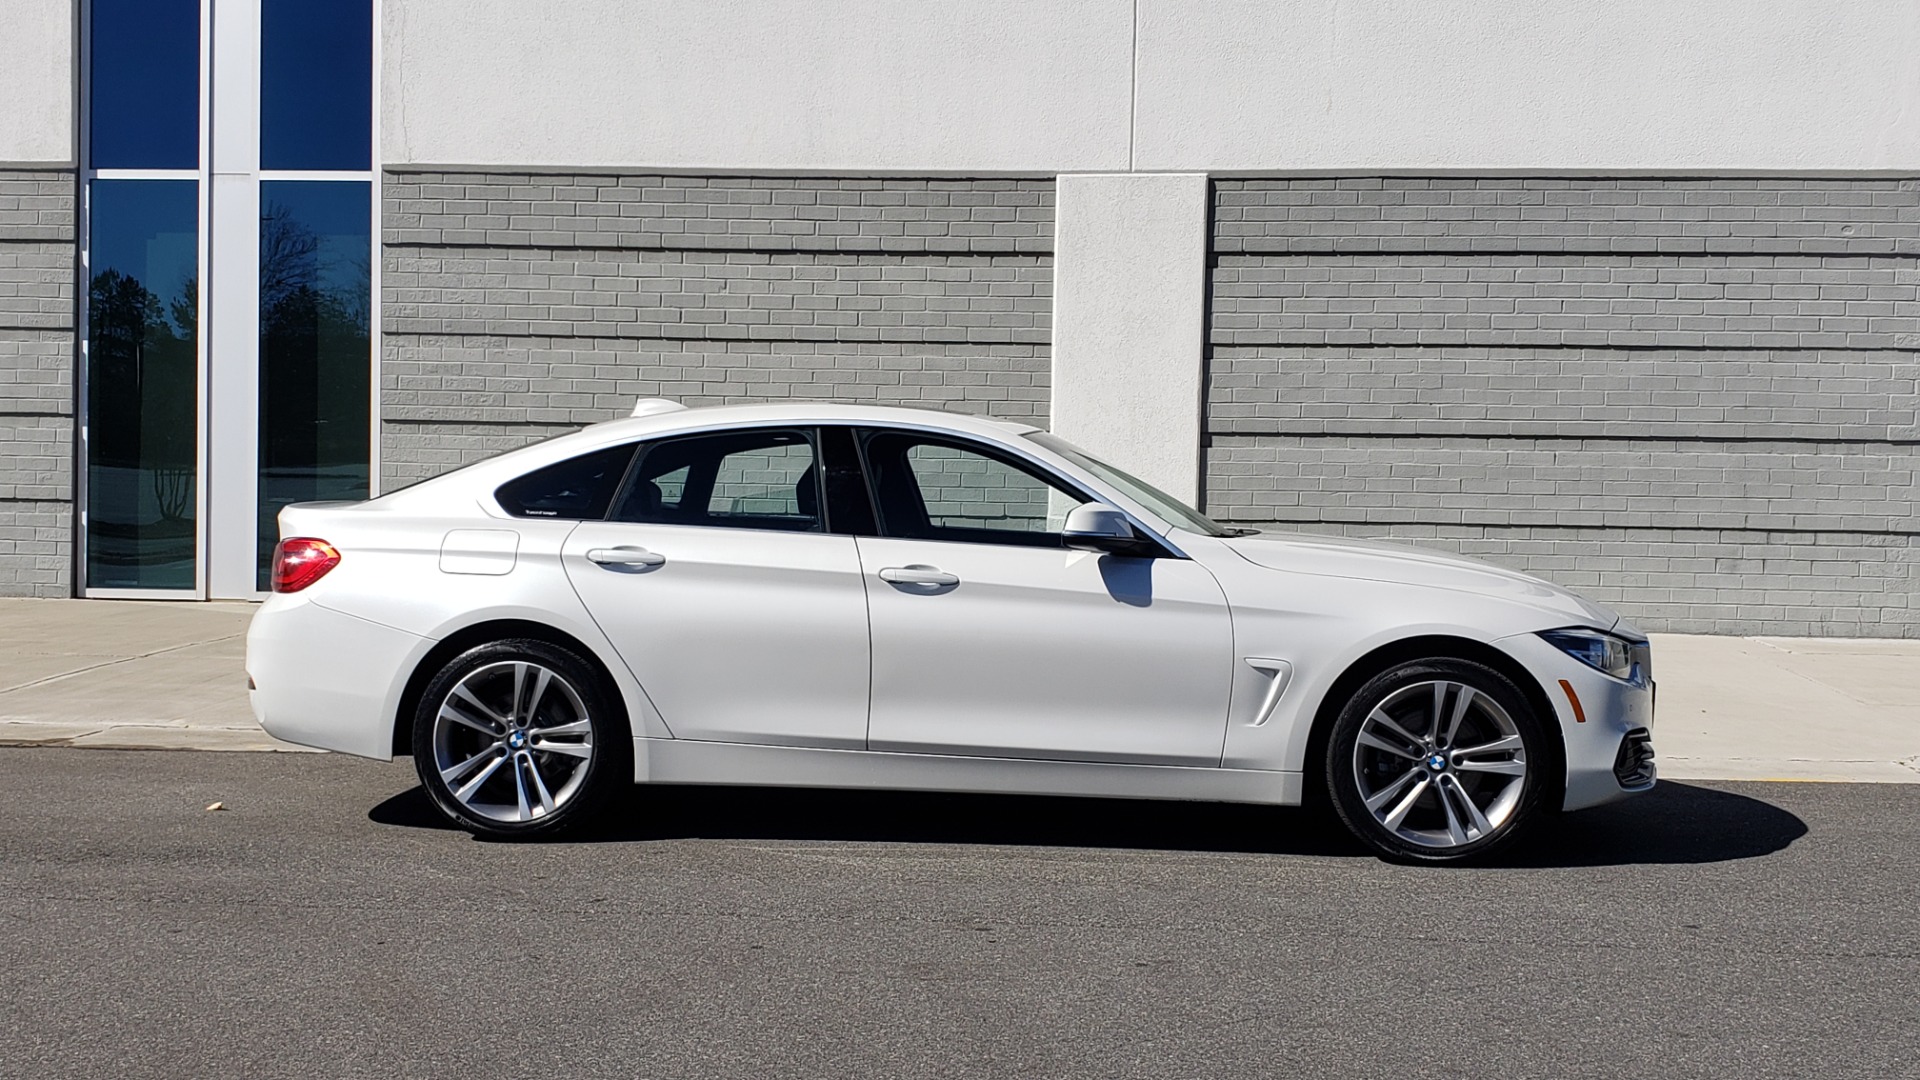 Used 2018 BMW 4 SERIES 430IXDRIVE / PREMIUM / NAV / SUNROOF / ESSENTIALS PKG for sale Sold at Formula Imports in Charlotte NC 28227 6